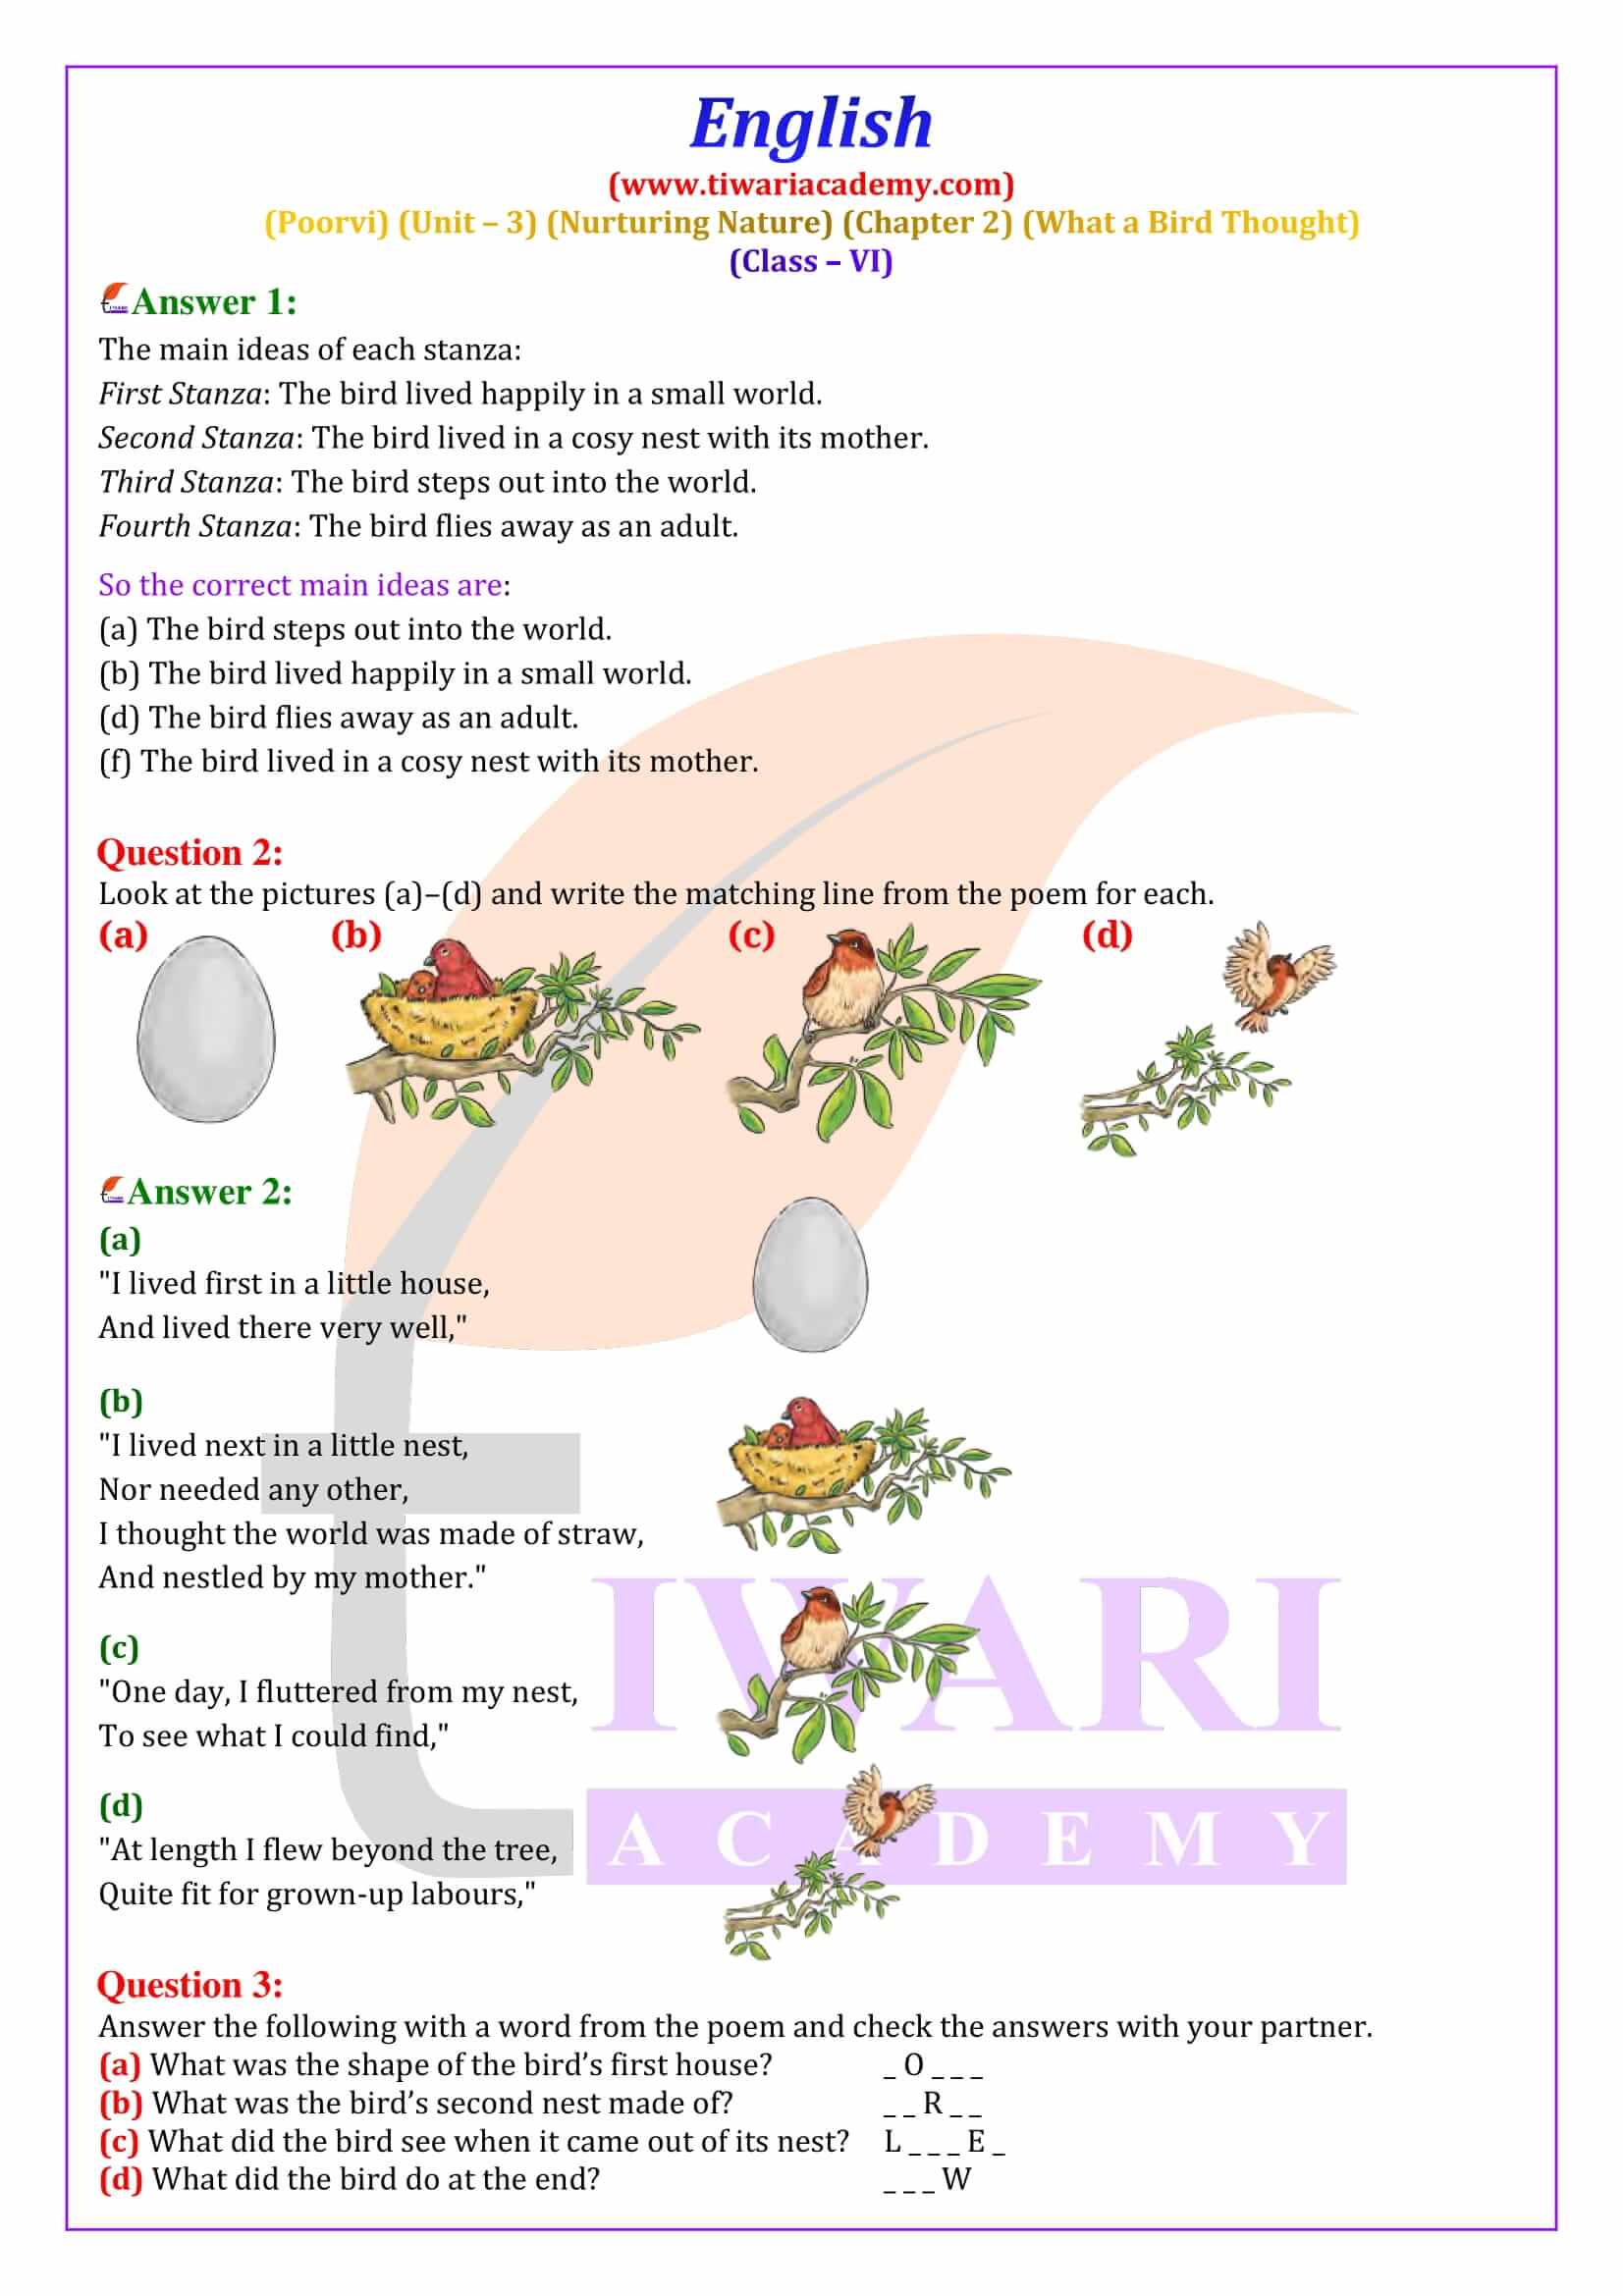 Class 6 English Poorvi Unit 3 Nurturing Nature Chapter 2 What a Bird Thought Question Answers